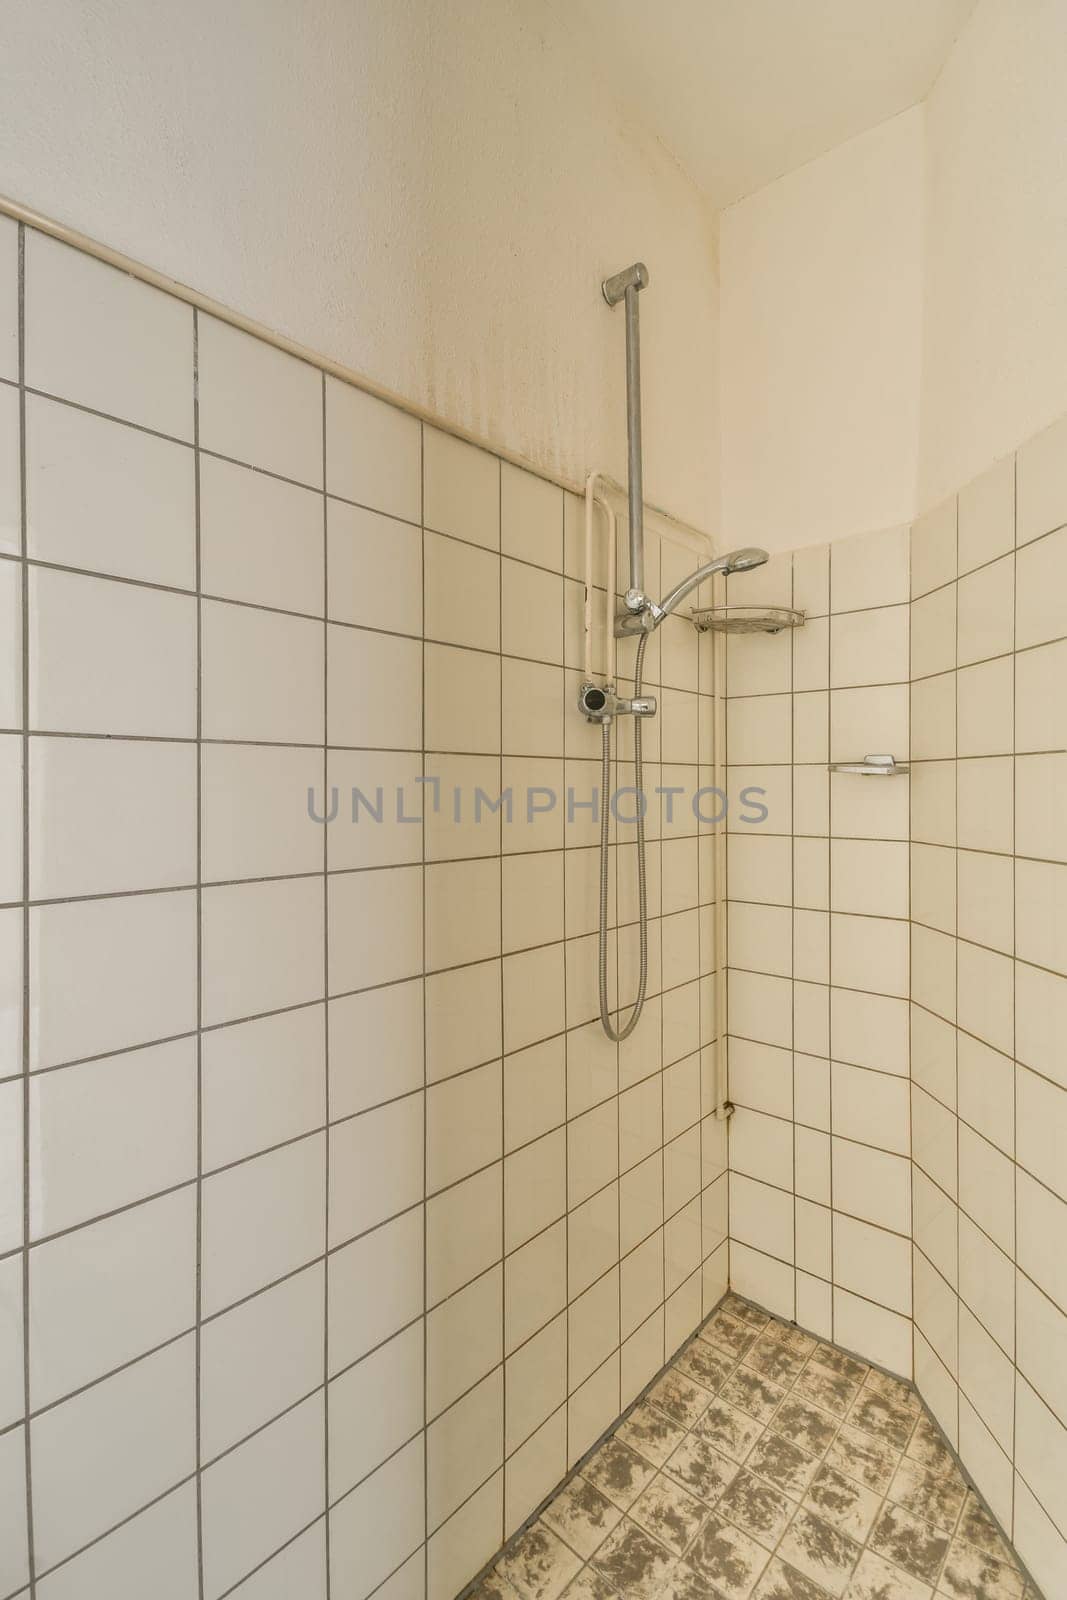 a bathroom with tile on the floor and shower head mounted to the wall, in front of white tiled walls